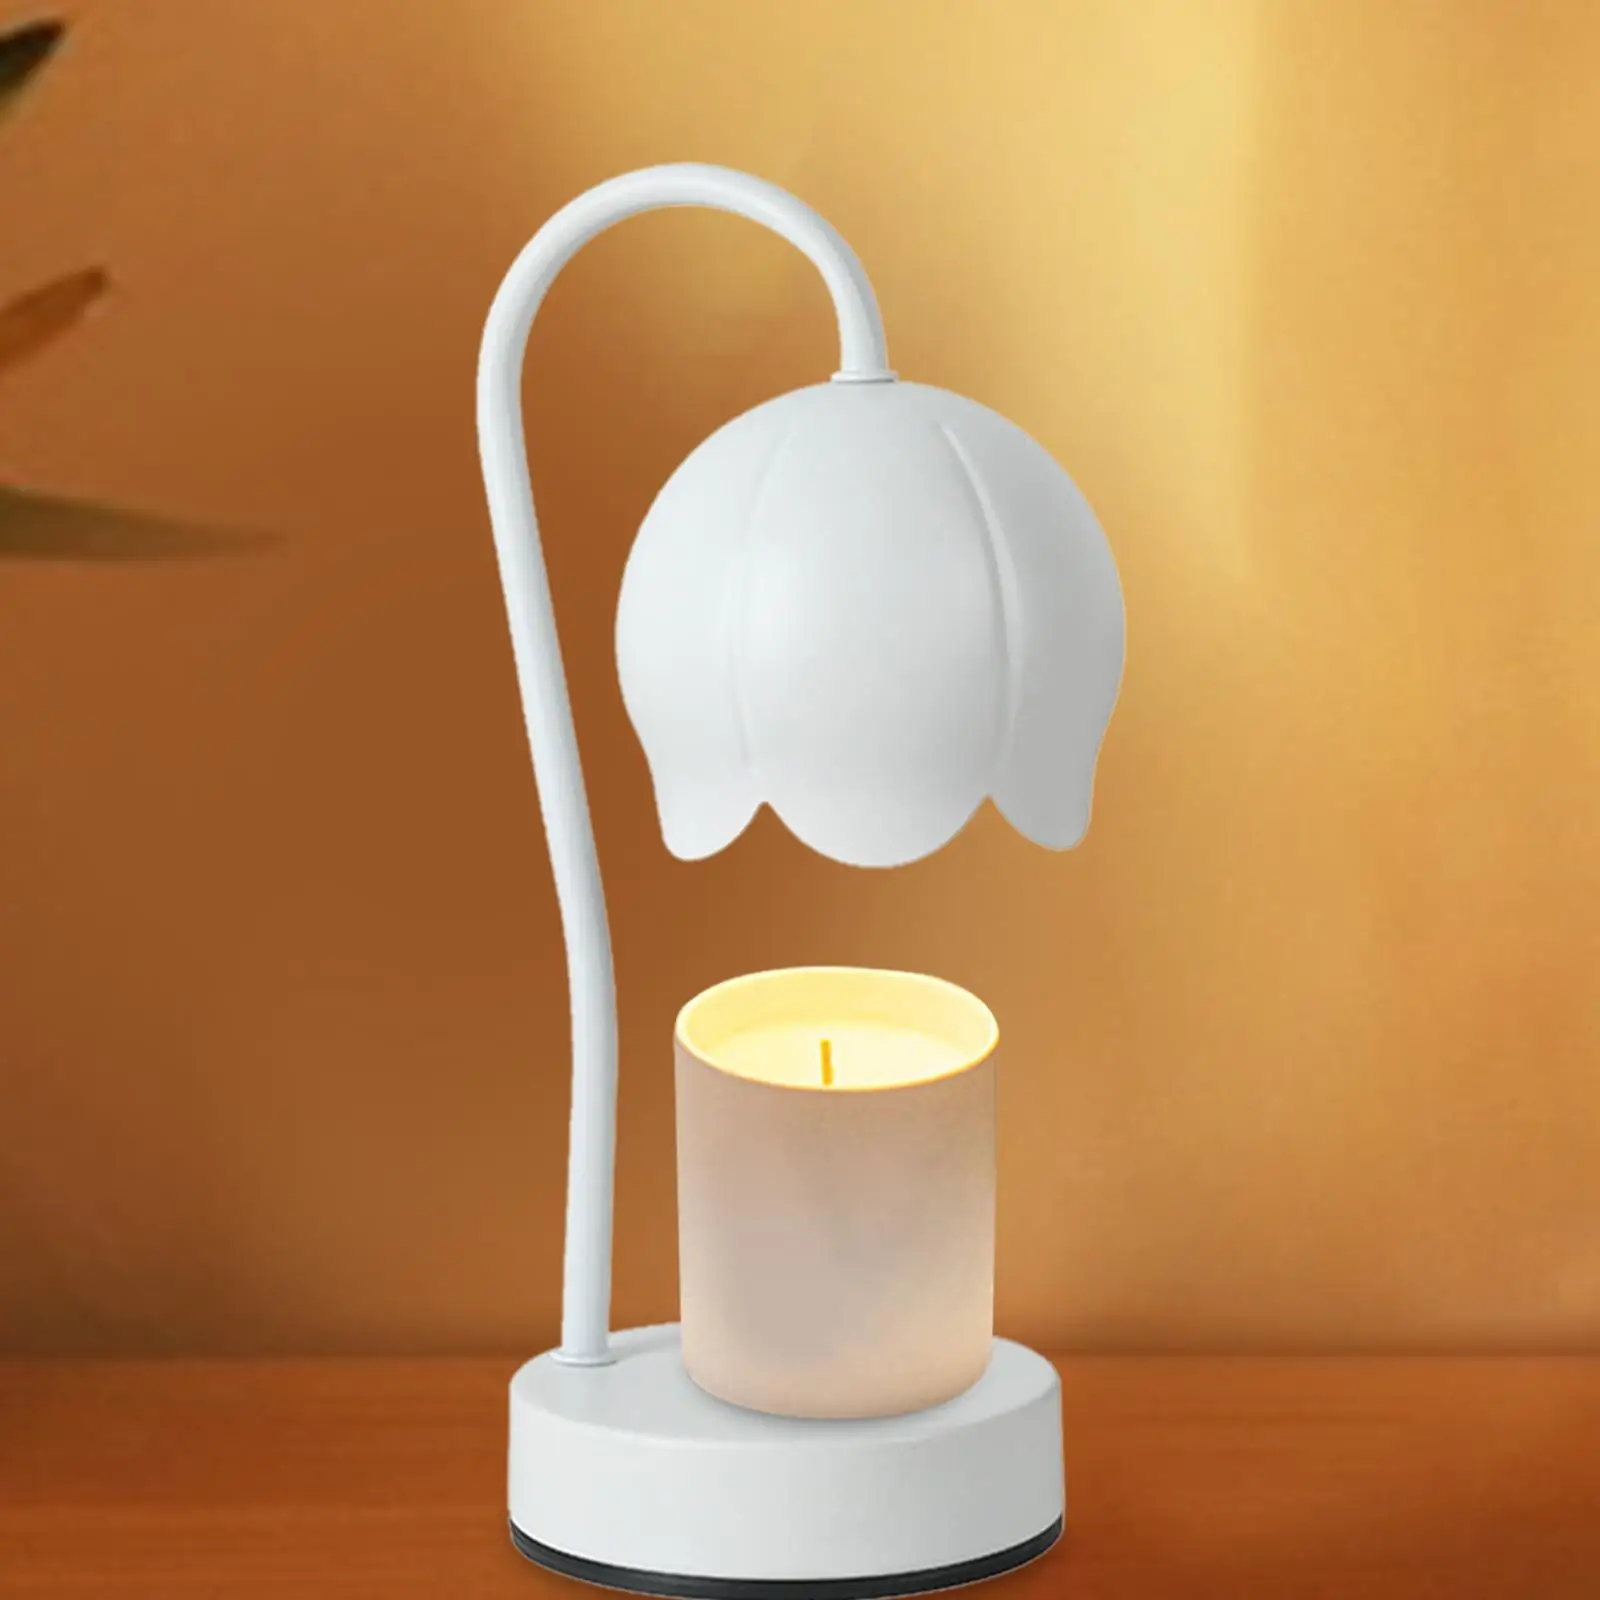 No Flame Candle Warmer Lamp Aromatic Candle Holders Burner Melter Lamp Candle Heater Lamp for Bar Office Tabletop Birthday Gift